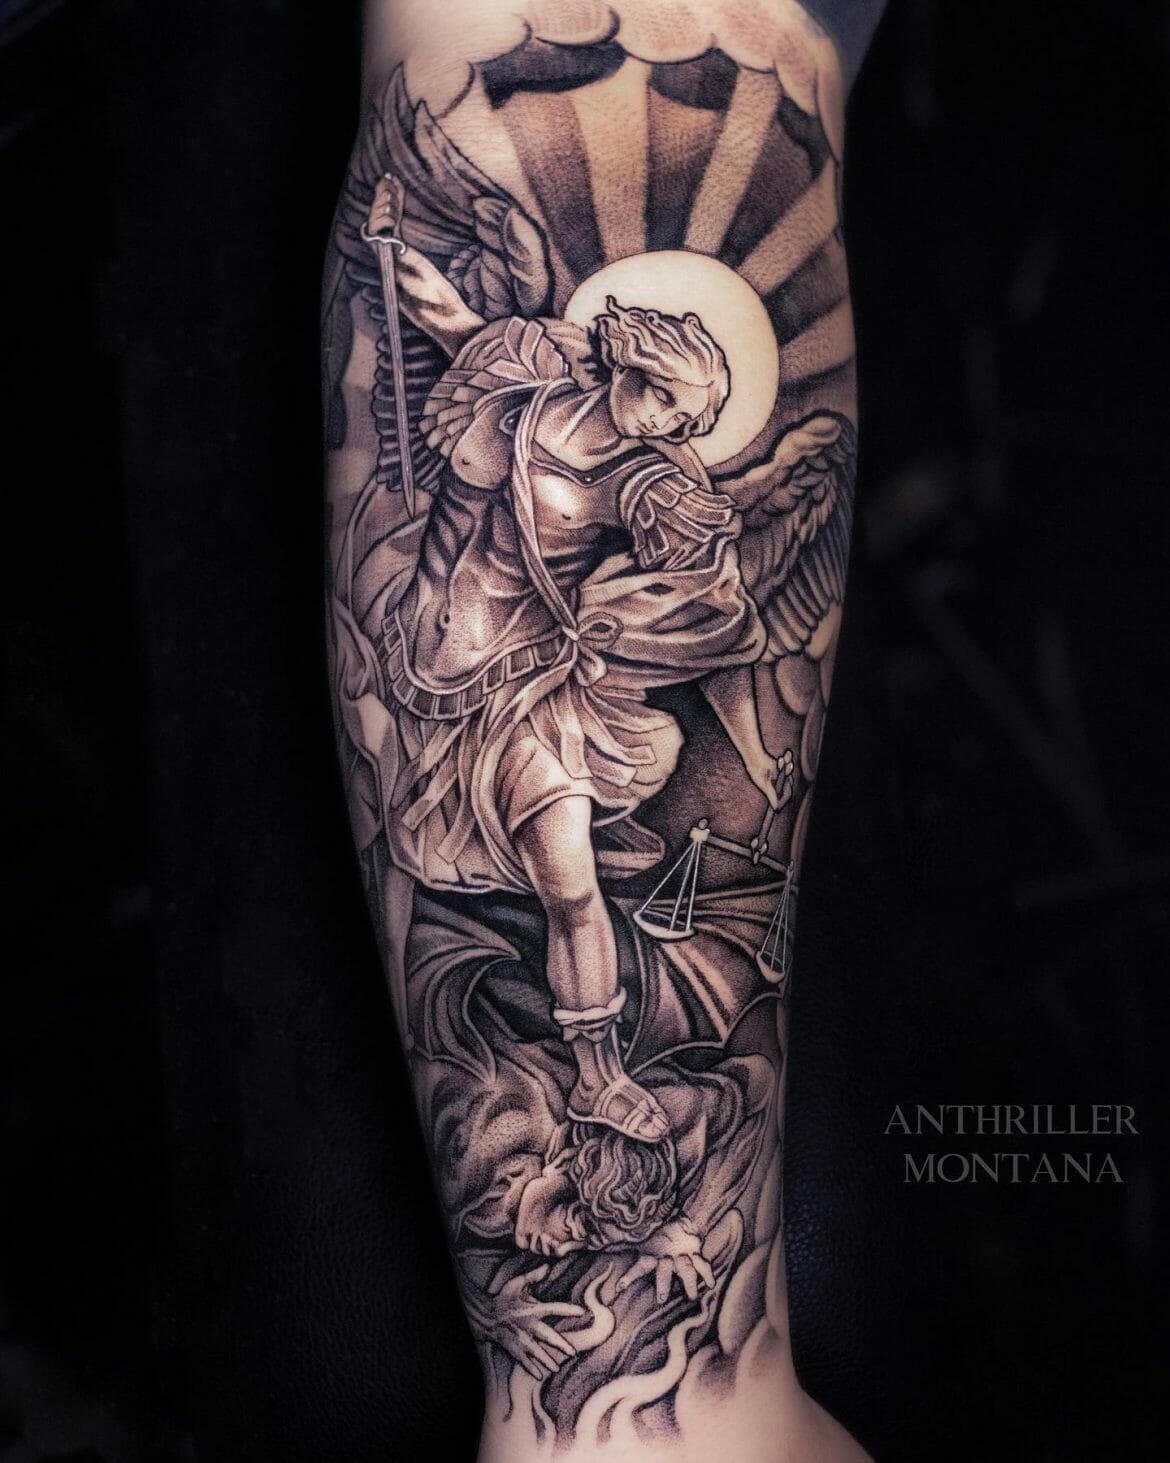 101 Best St Michael Tattoo Ideas You Have To See To Believe! Outsons